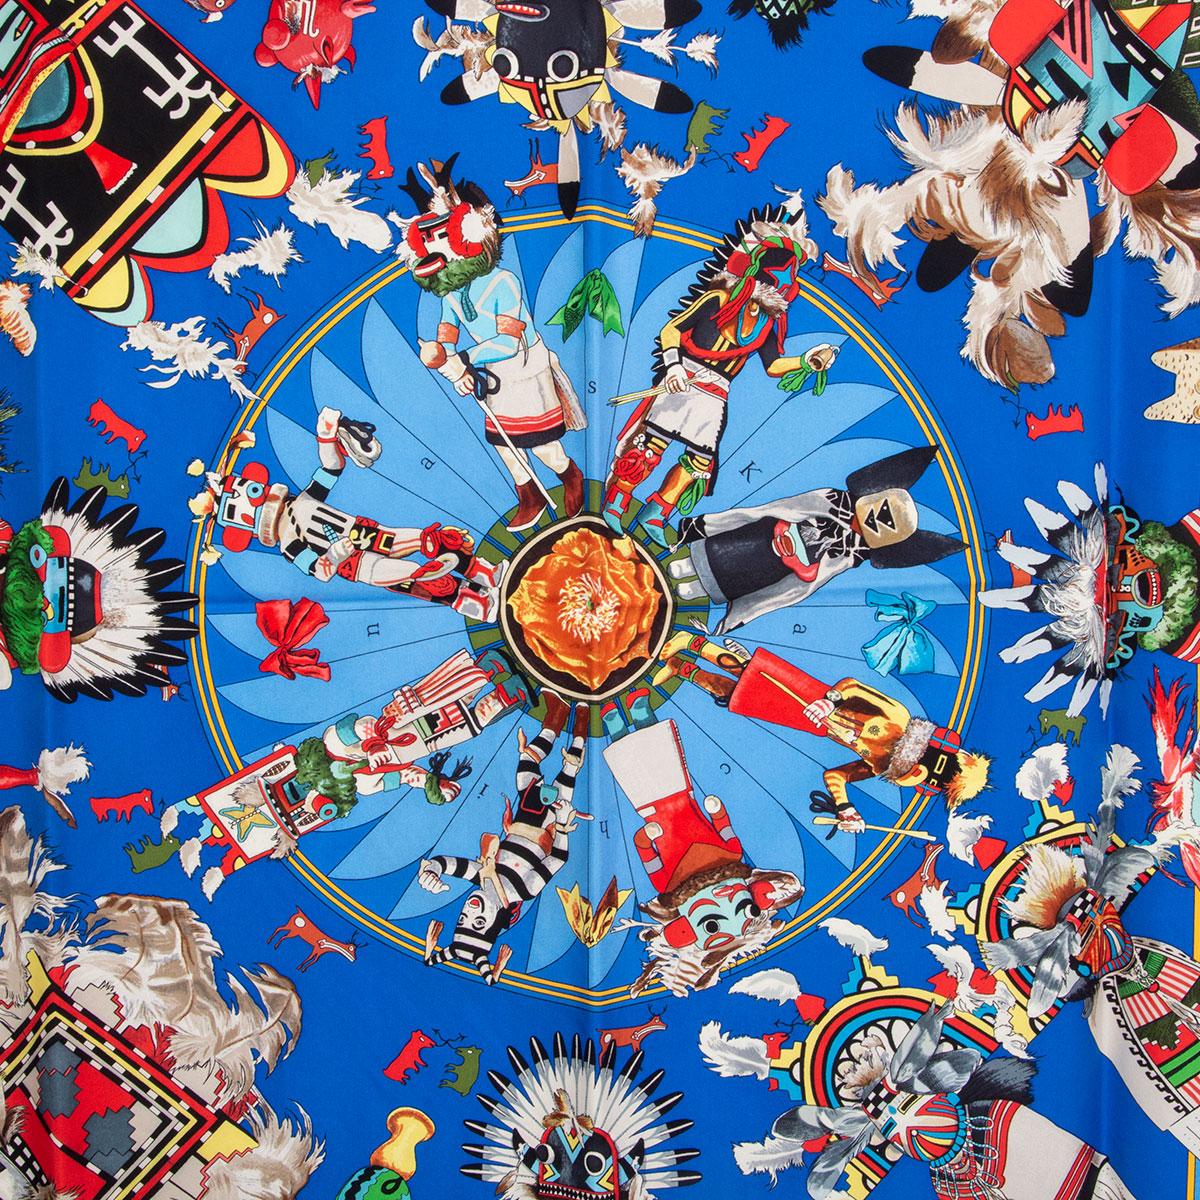 100% authentic Hermes 'Kachinas 90' scarf by Kermit Oliver in light and dark blue silk twill (100%) with details in yellow, red, green and grey. Has been worn and is in excellent condition.

Width 90cm (35.1in)
Height 90cm (35.1in)

All our listings